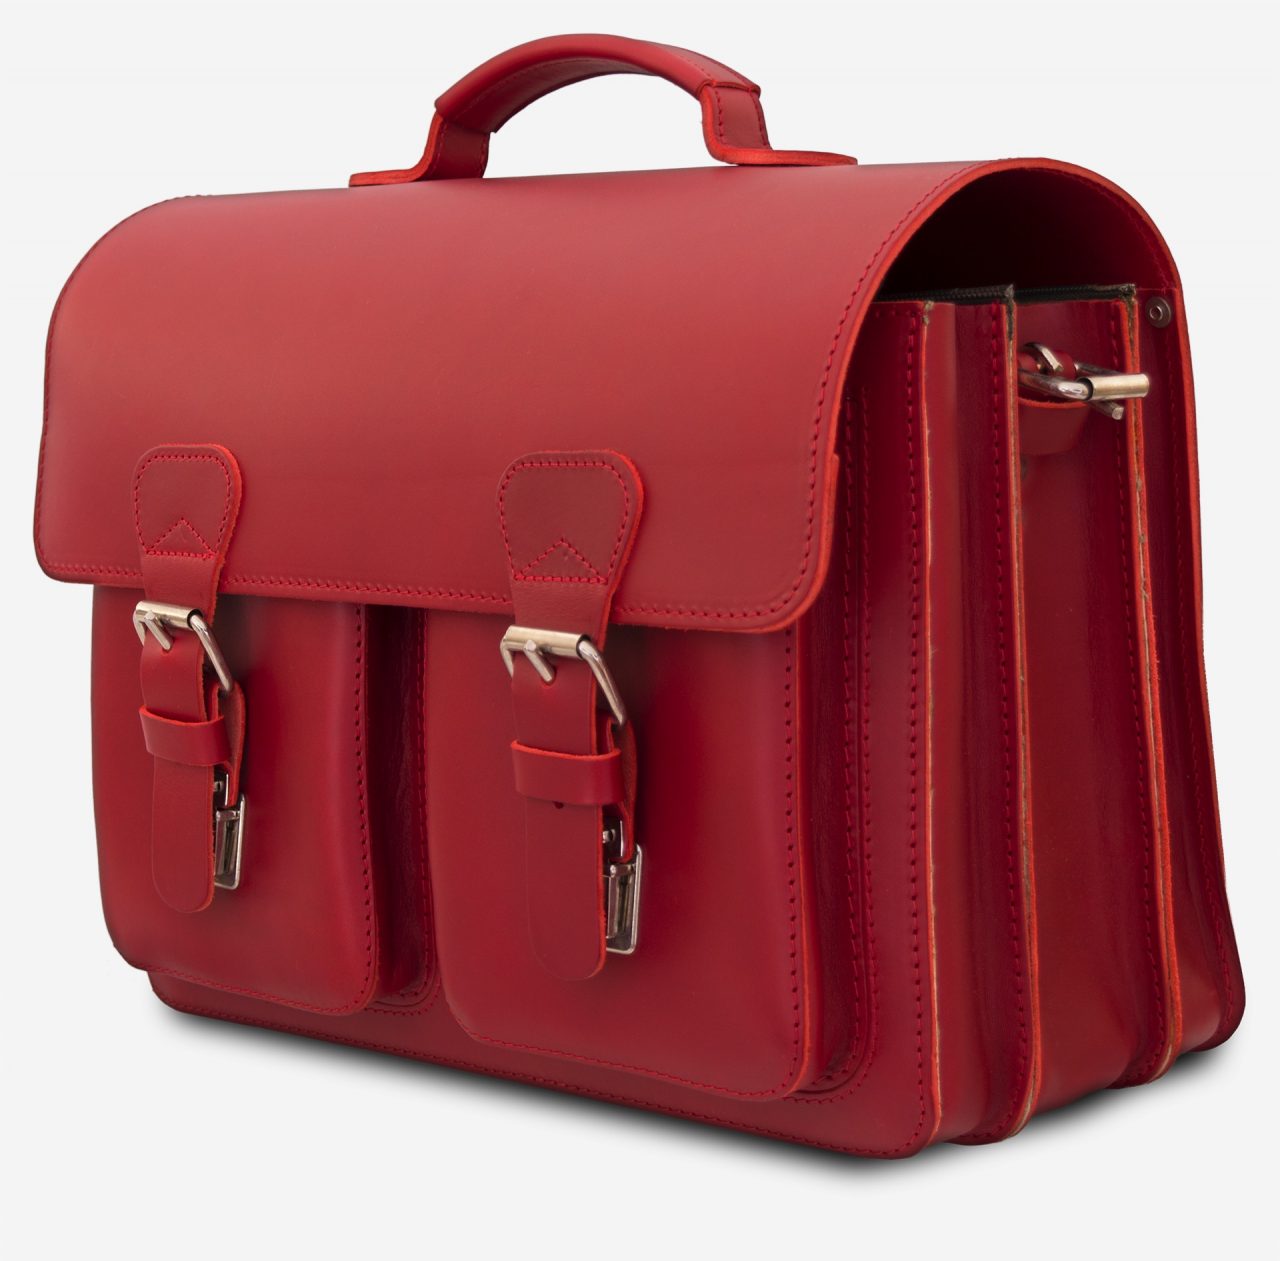 Side view of red leather satchel briefcase bag with 3 gussets and symmetric front pockets for women - 152139.